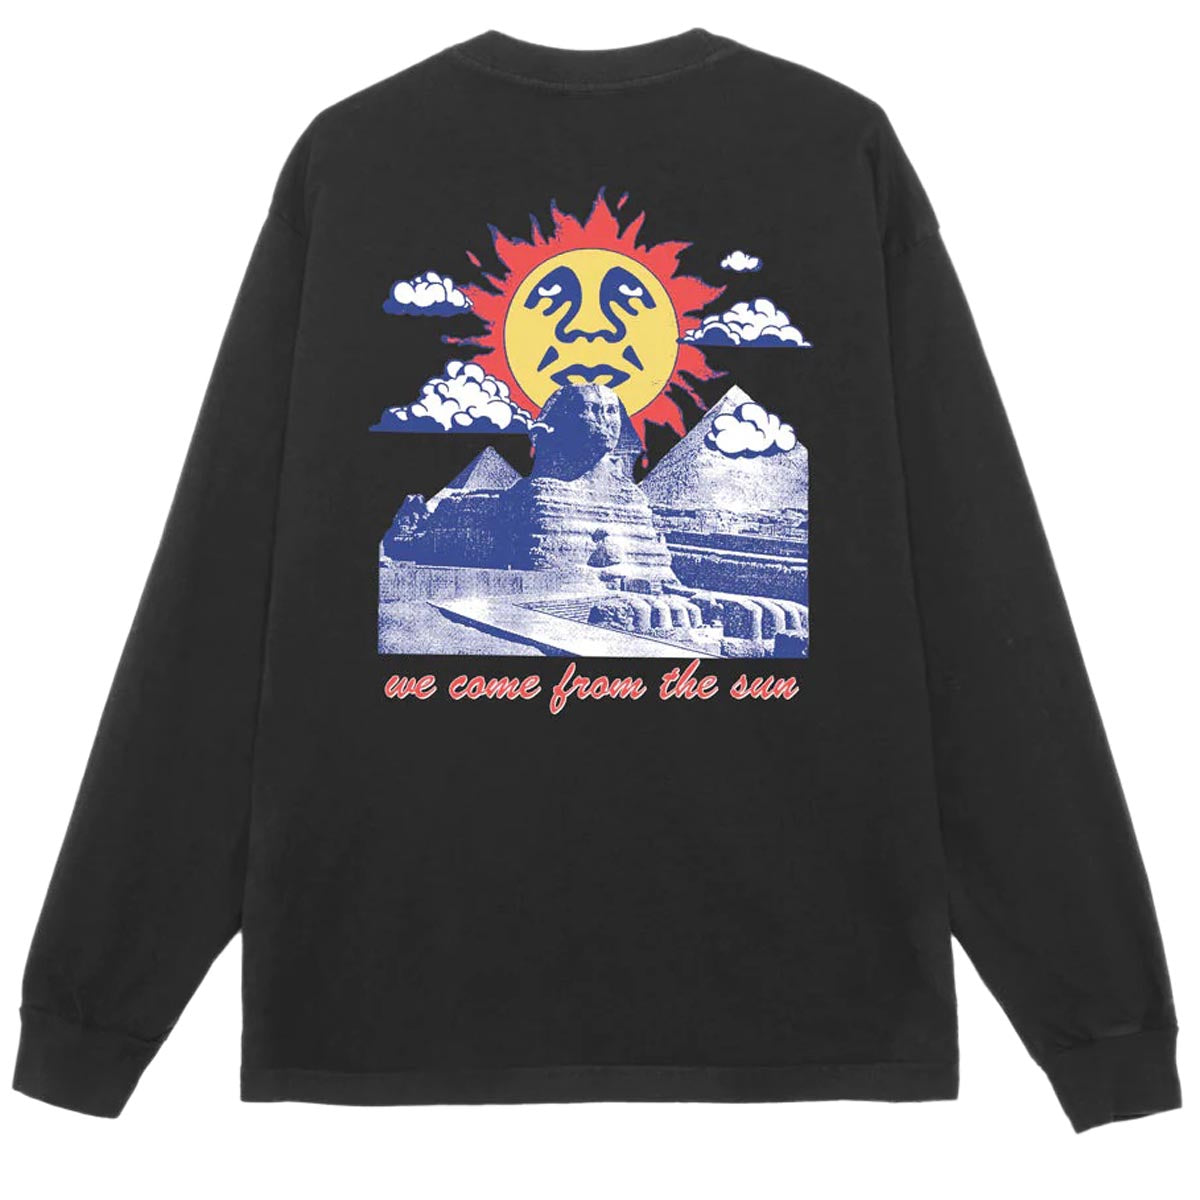 Obey We Come From The Sun Long Sleeve T-Shirt - Vintage Black image 1